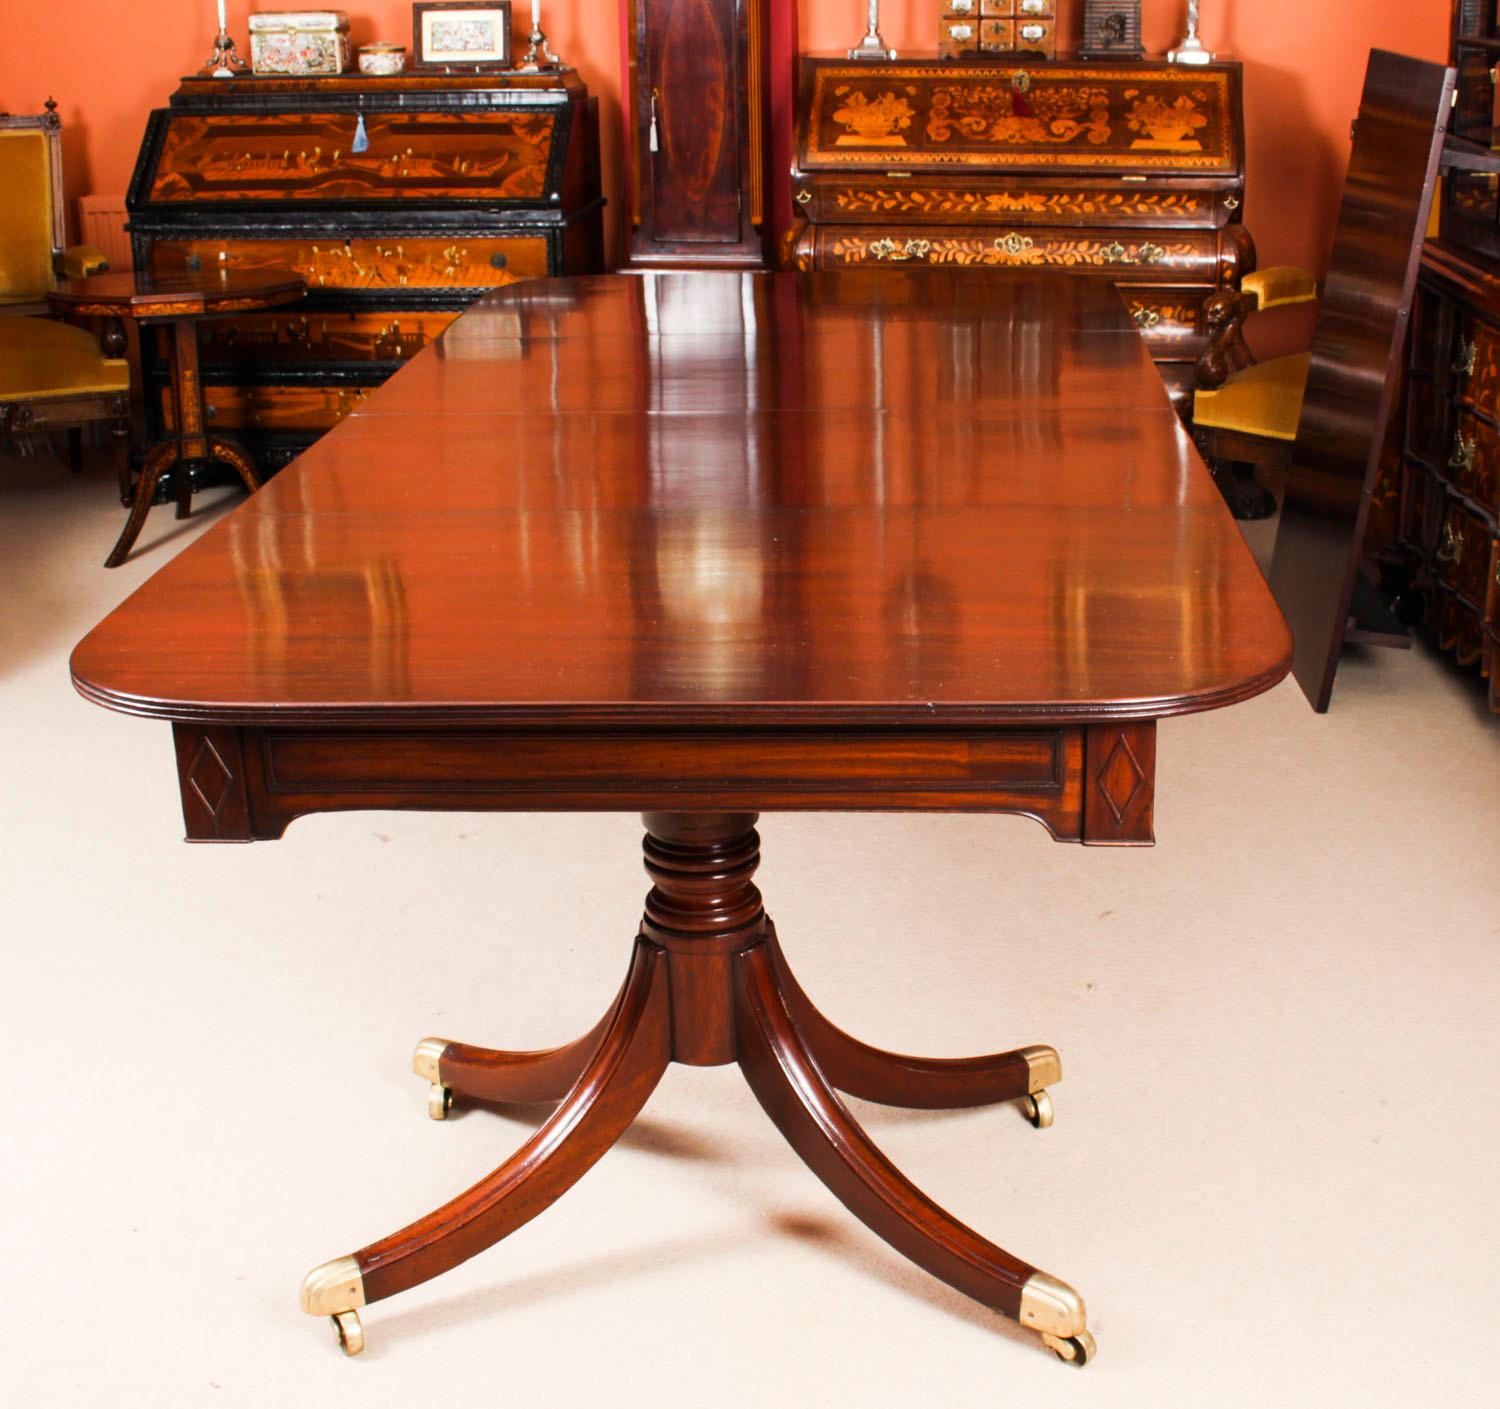 Antique Twin Pillar Regency Dining Table and 10 Regency Chairs, 19th Century 3